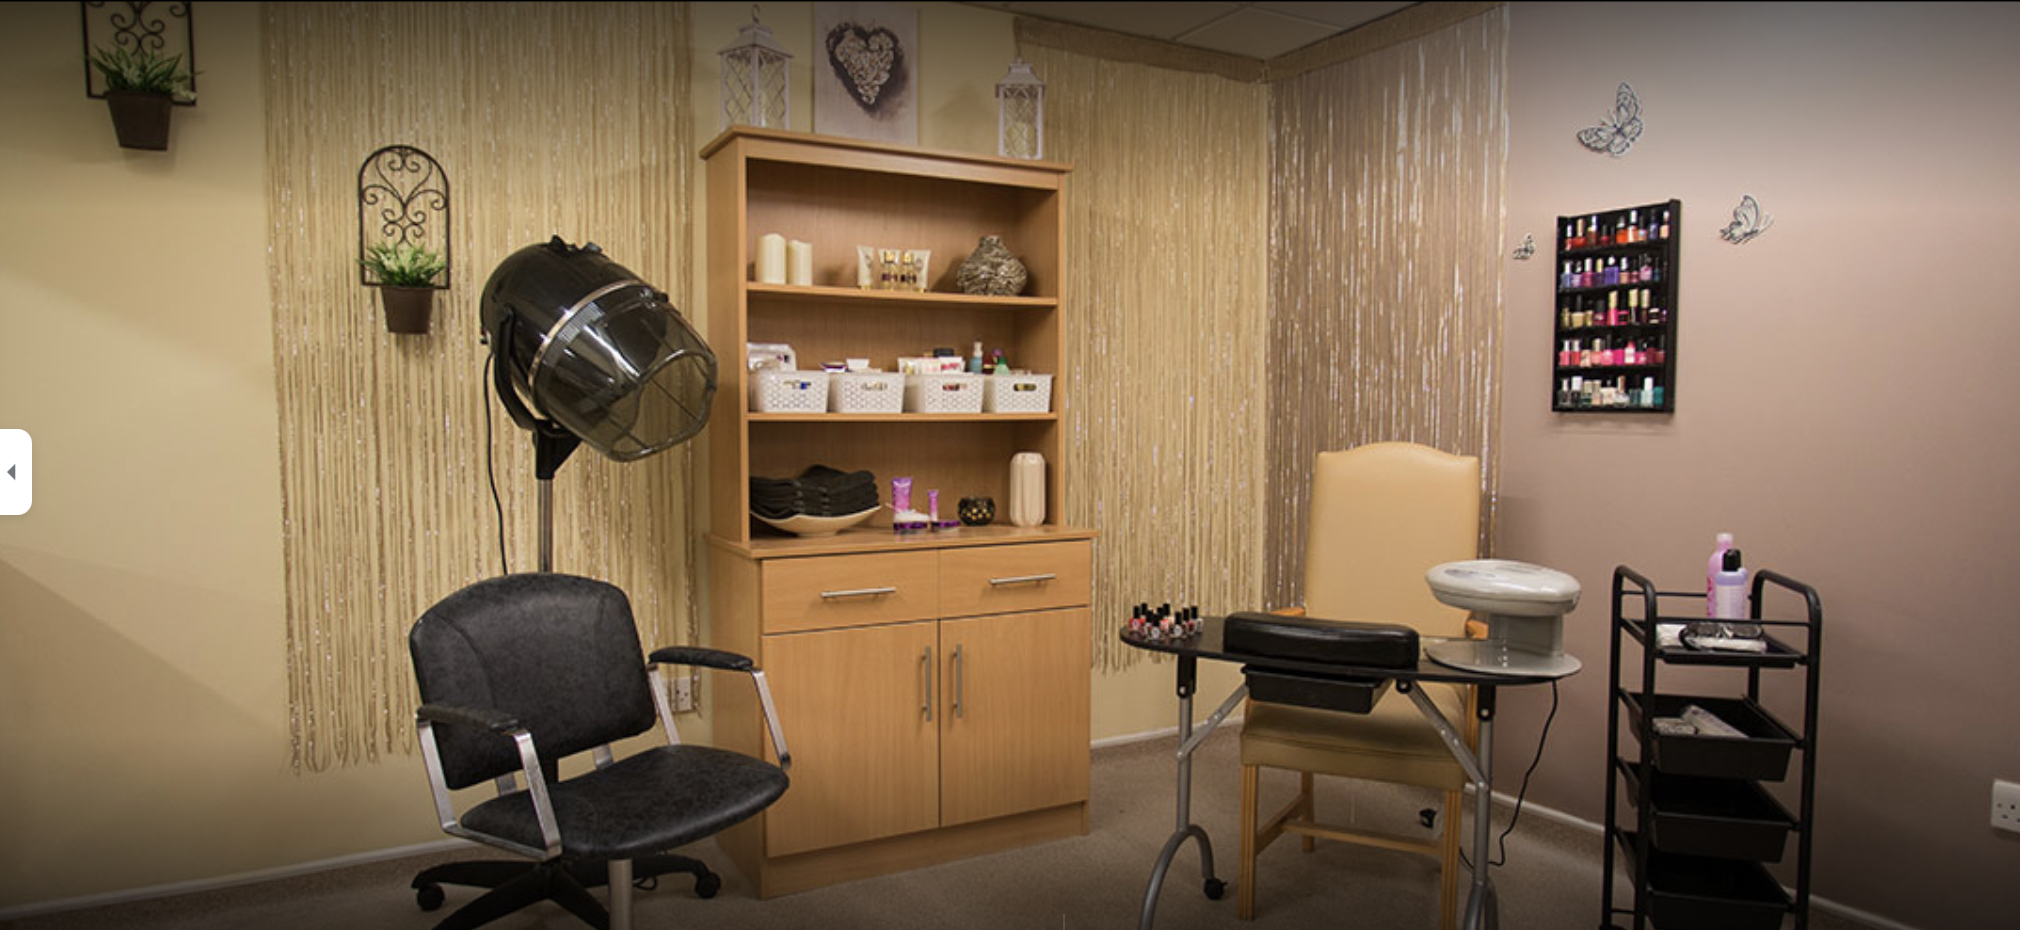 Salon of Ardenlea Court care home in Solihull, West Midlands